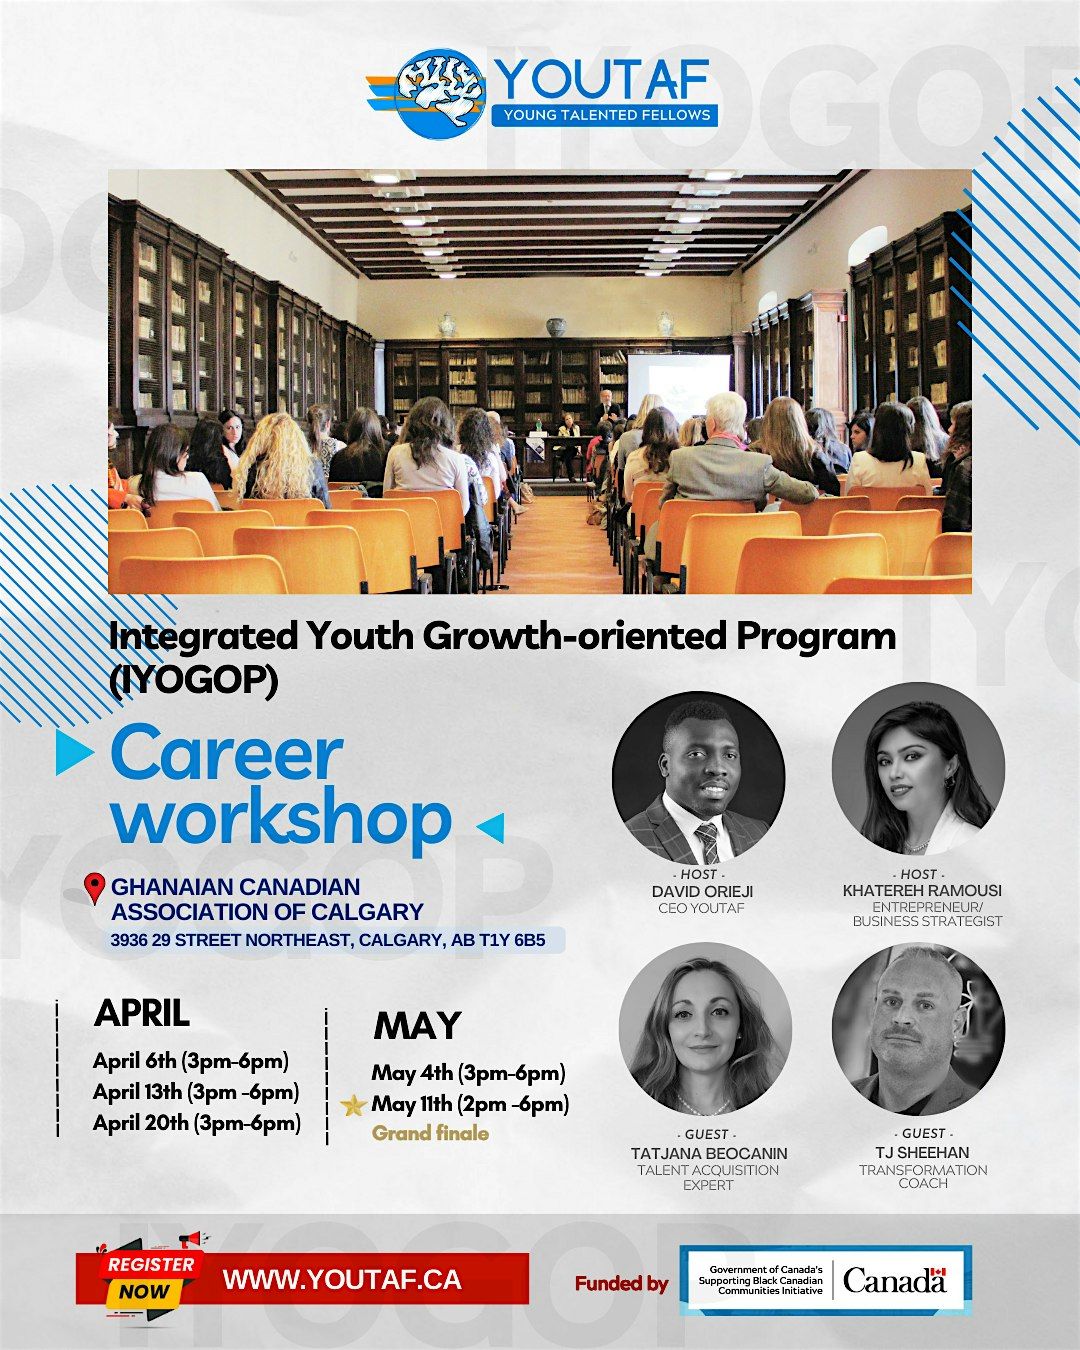 Integrated Youth Growth-Oriented Program (INYOGOP) - Career Workshop